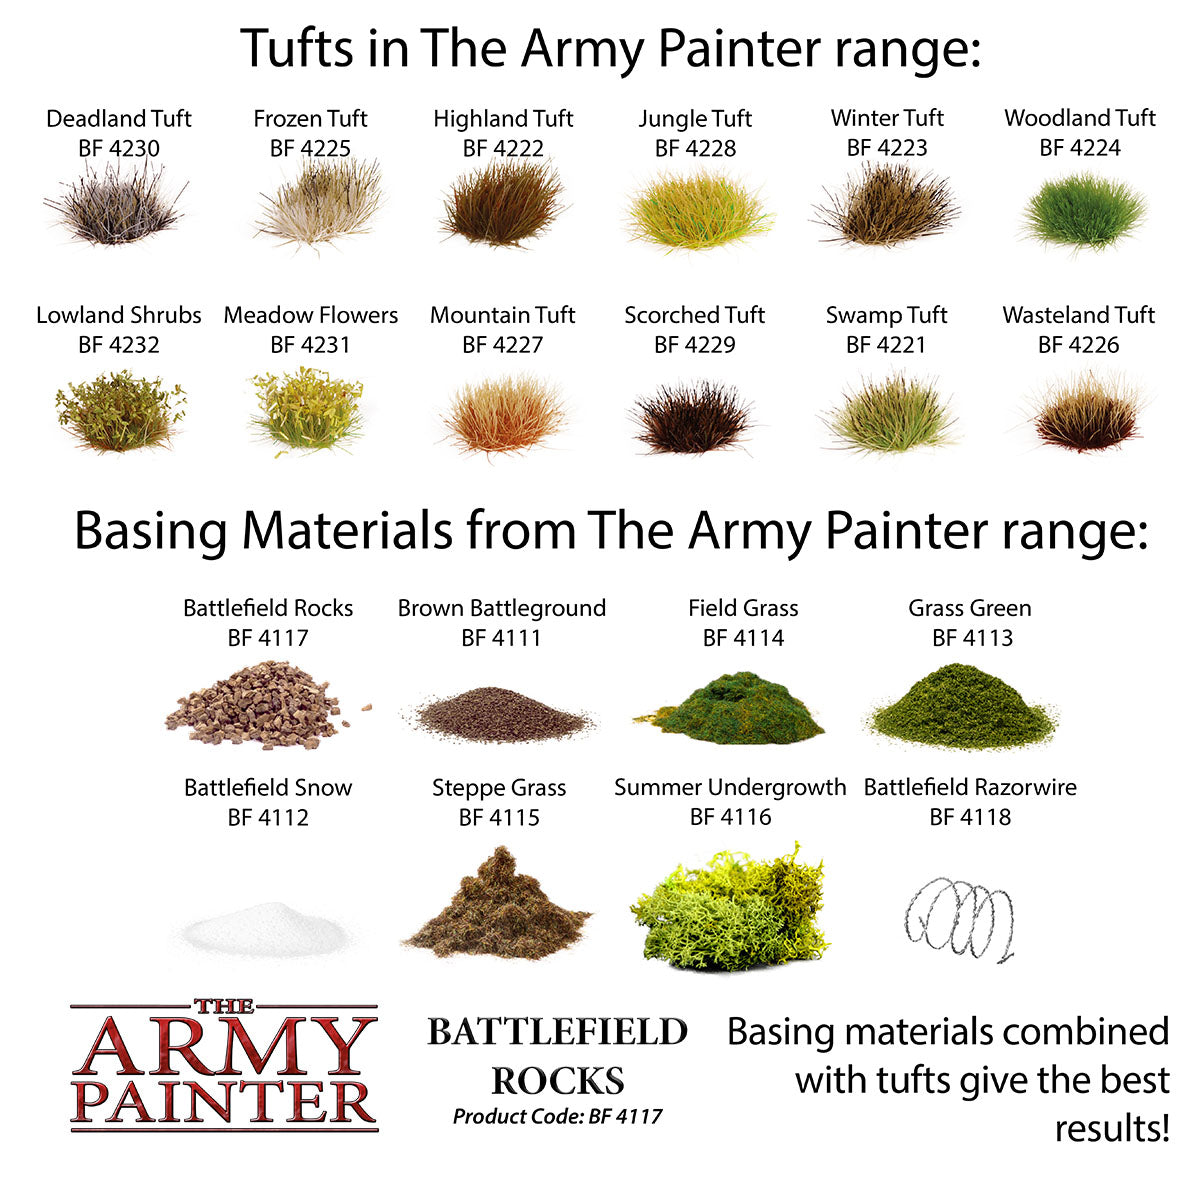 The Army Painter - Battlefield Rocks BF4117